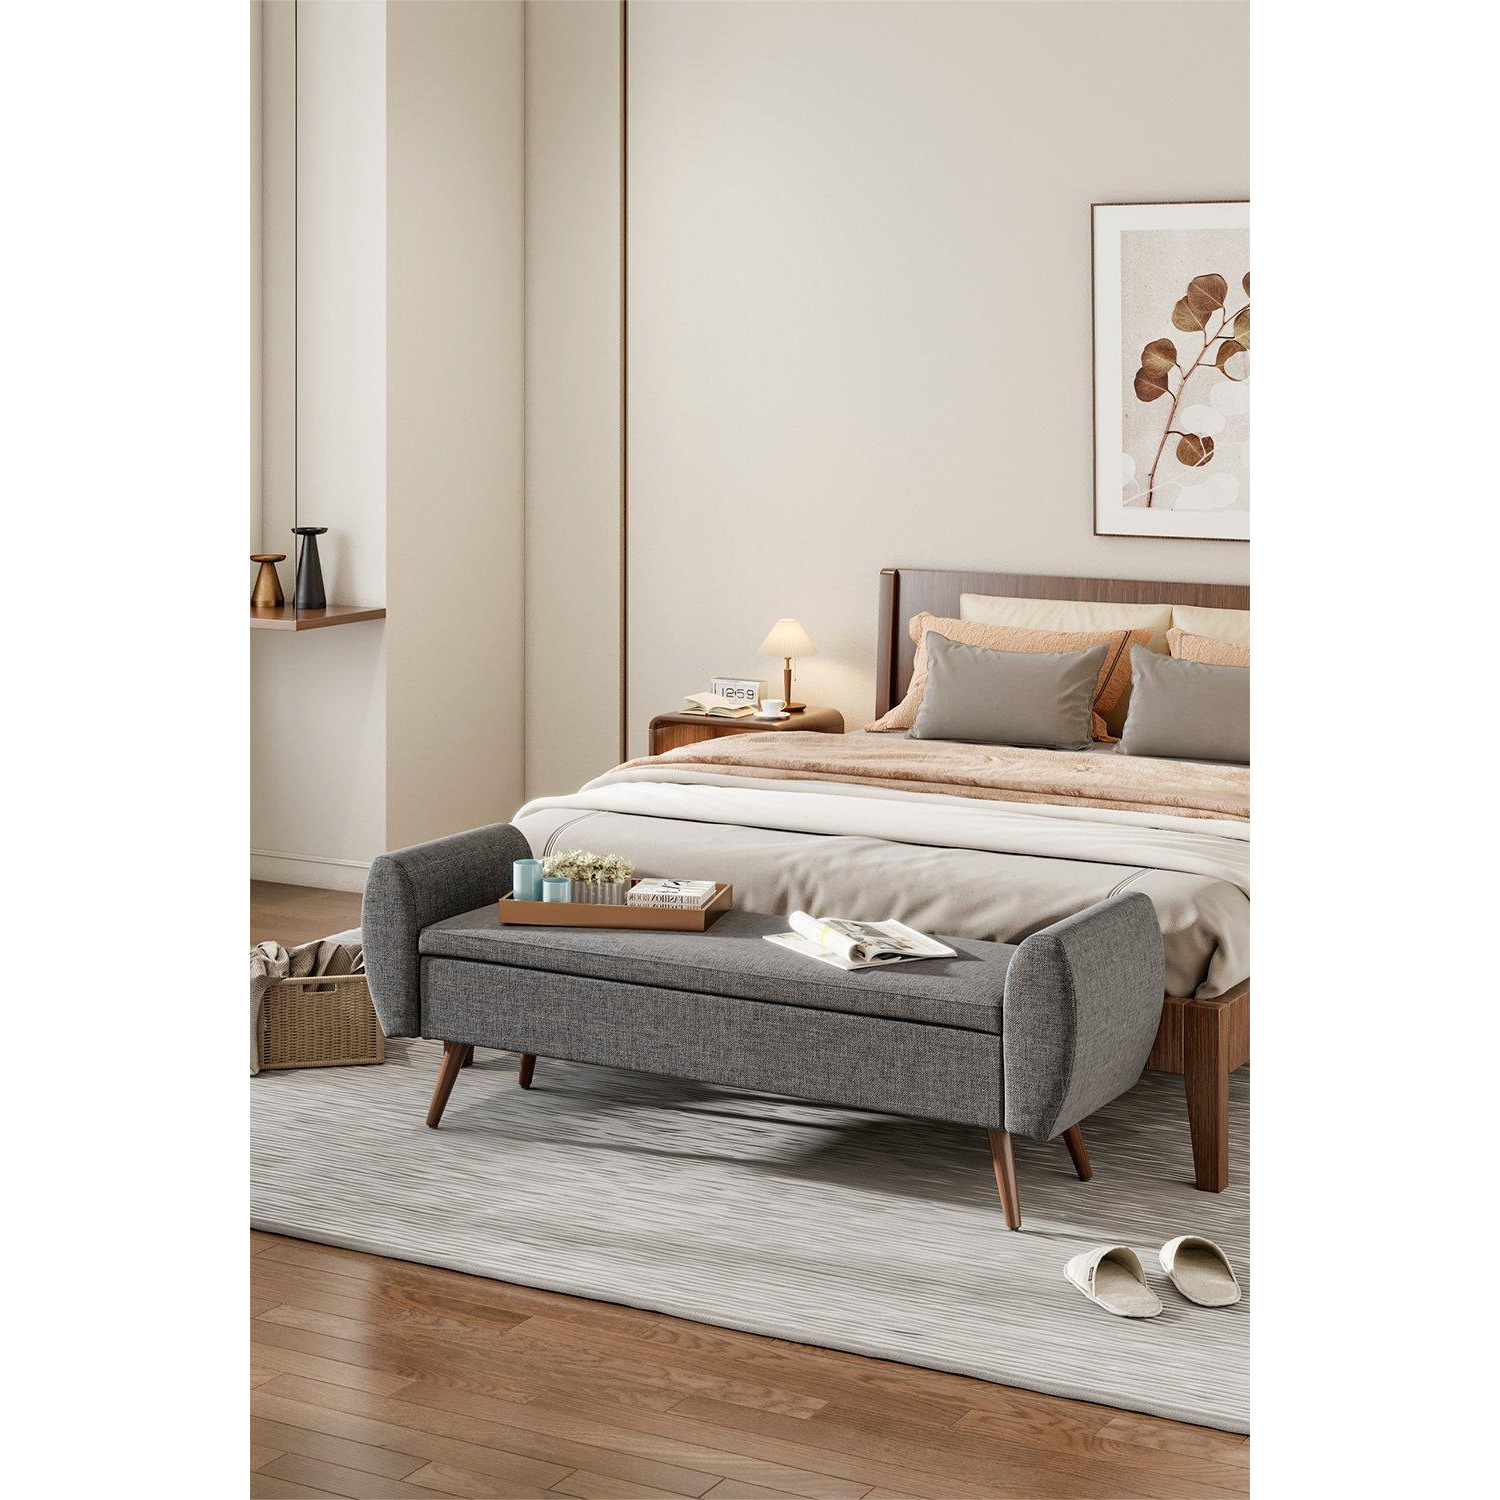 2-Seat Linen Upholstered Storage Bench with Side Arms and Walnut Colored Legs - image 1